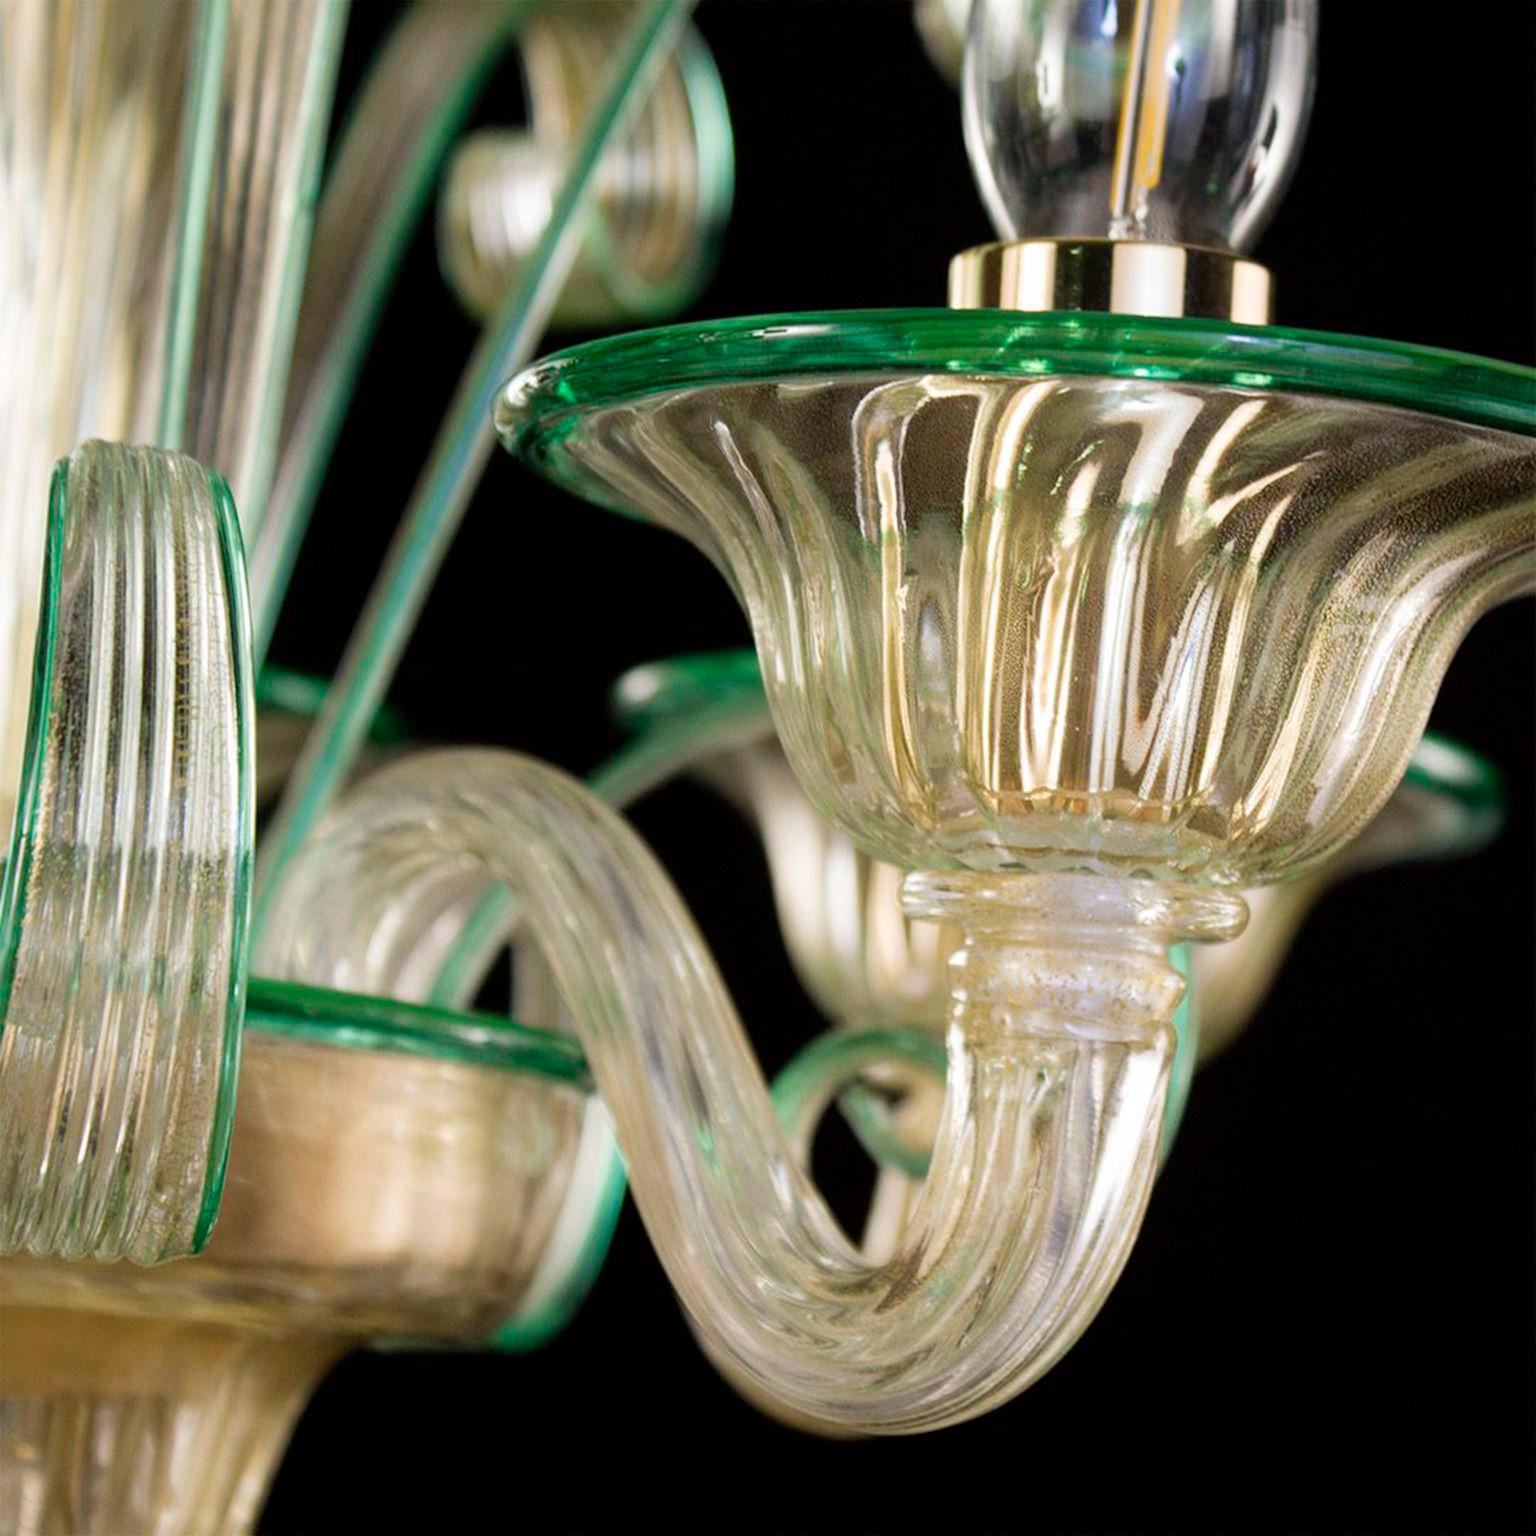 Capriccio chandelier, 5 lights, golden leaf artistic glass, with curly ornamental elements and green details by Multiforme.
Inspired by the Classic Venetian tradition it is characterised by a central column where many blown glass “pastoral” elements